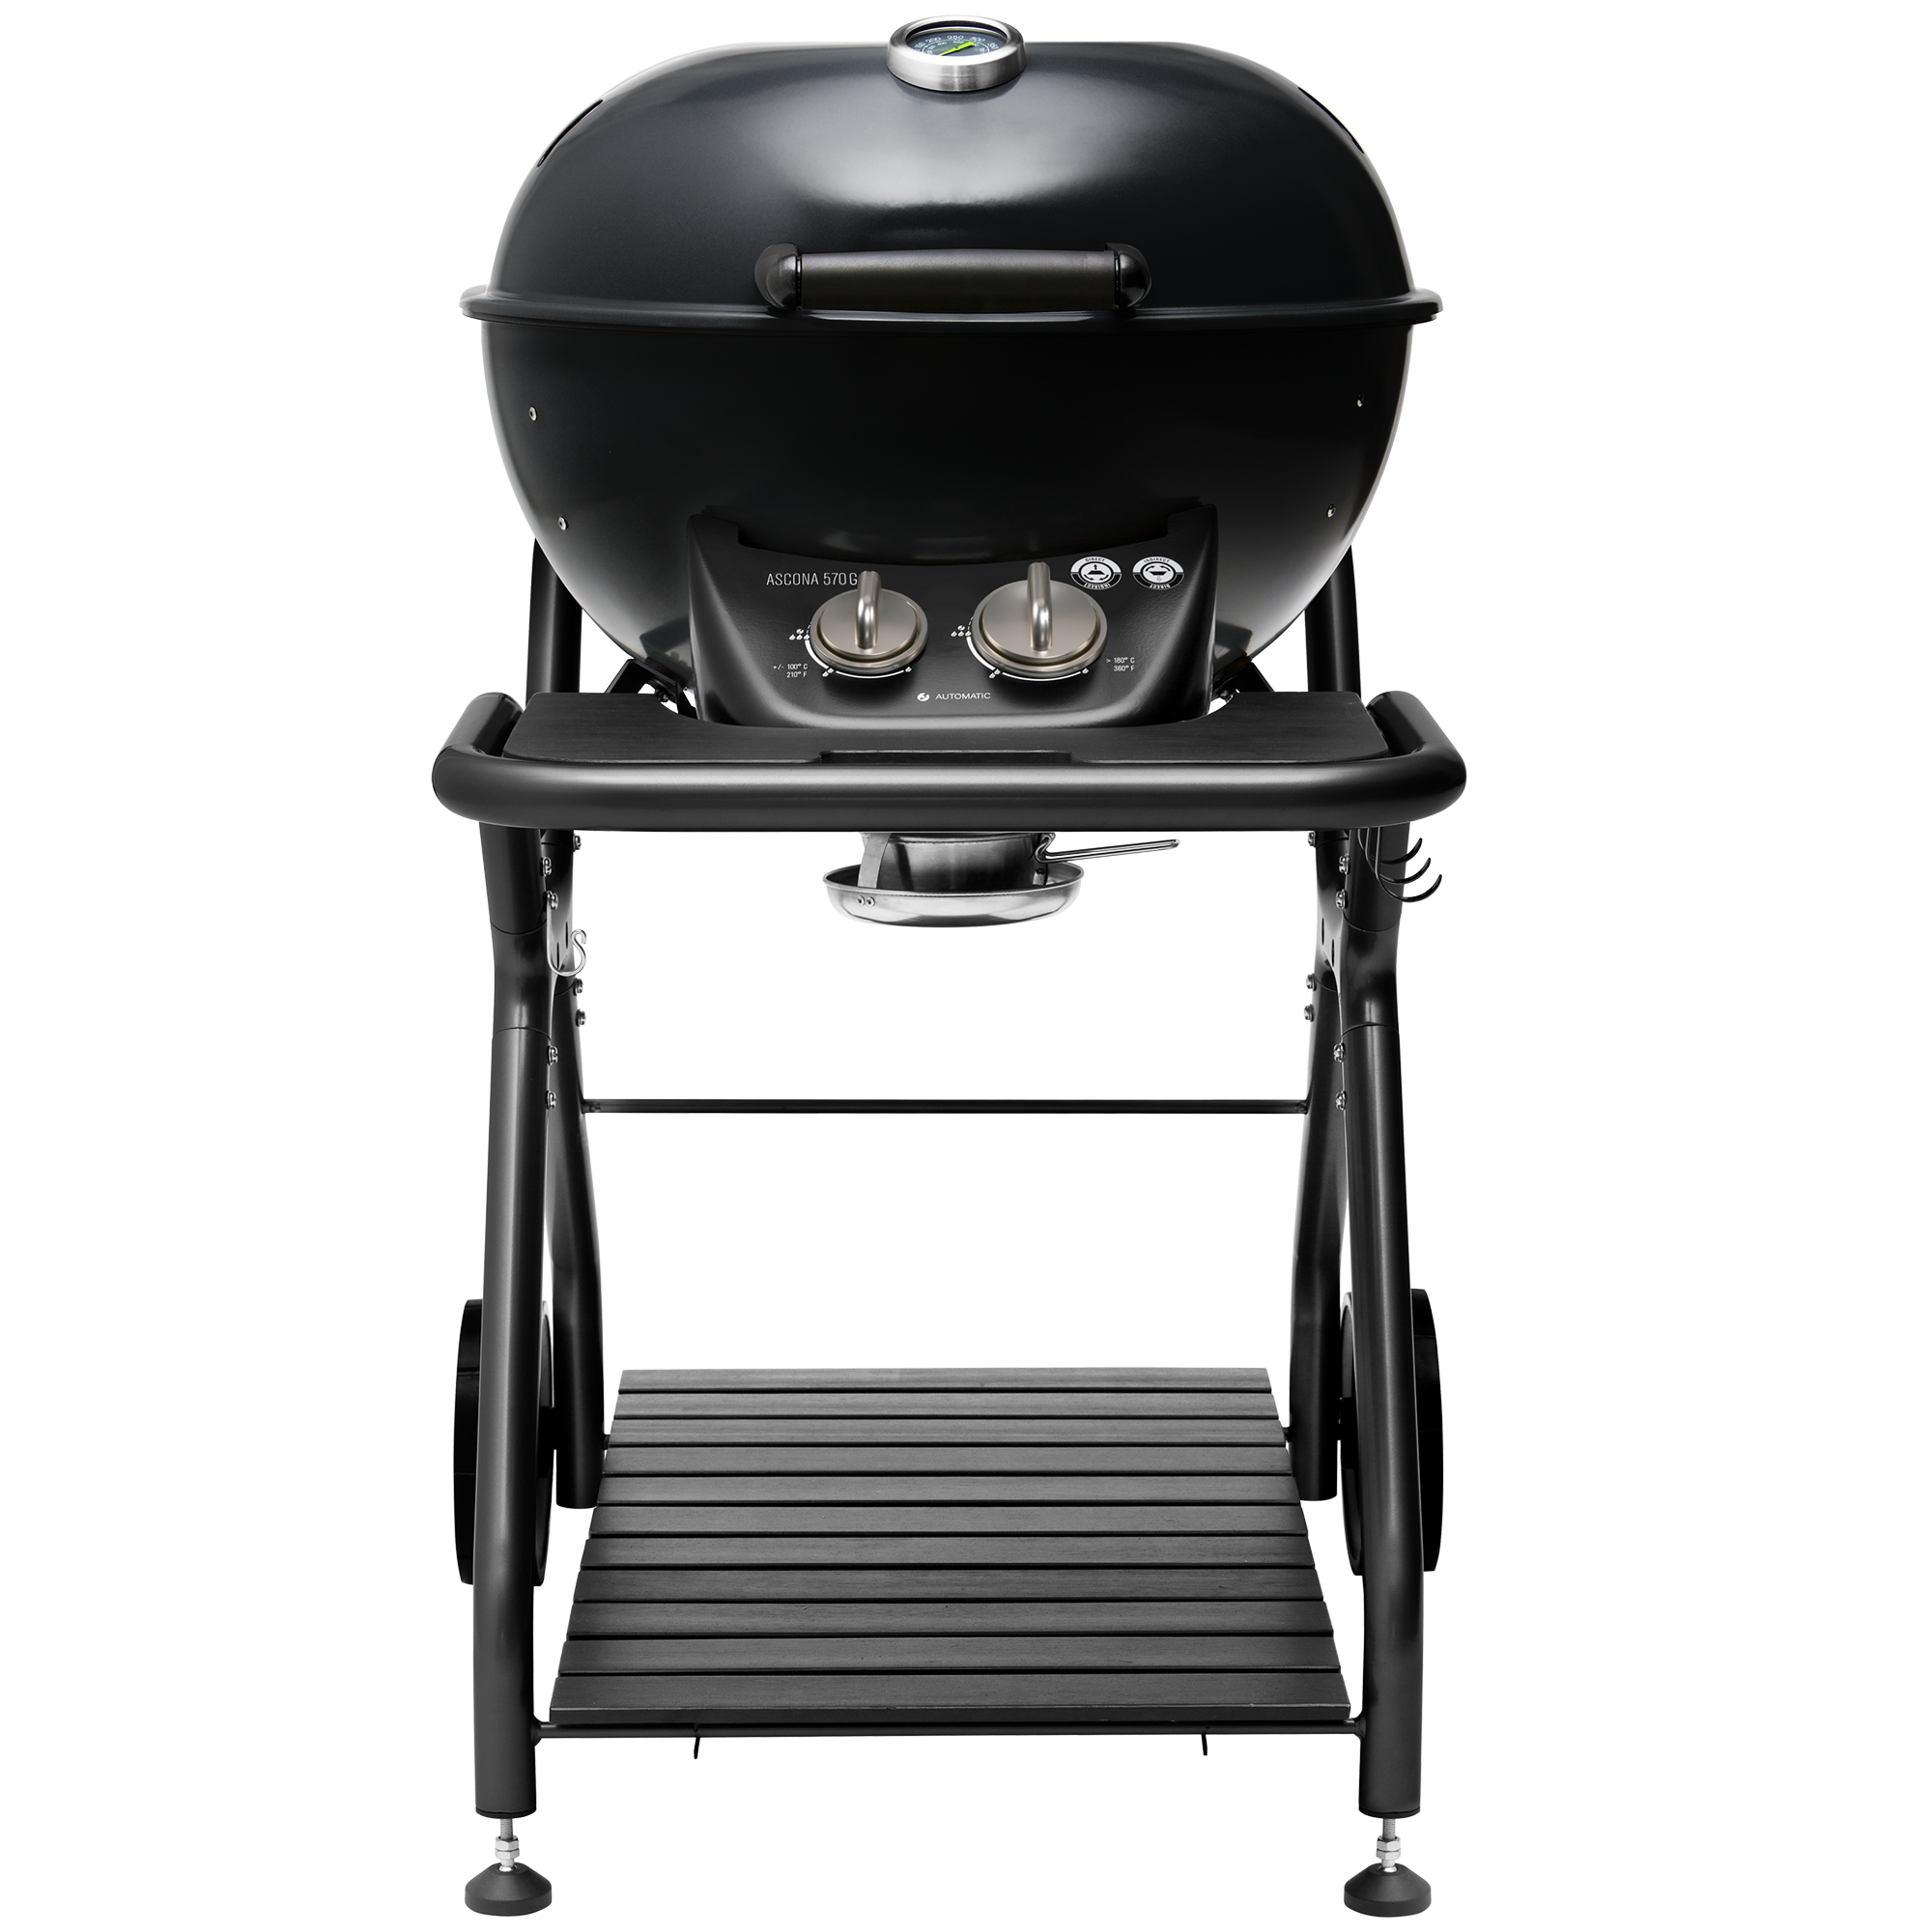 Plynov gril OUTDOORCHEF ASCONA 570 G ALL BLACK